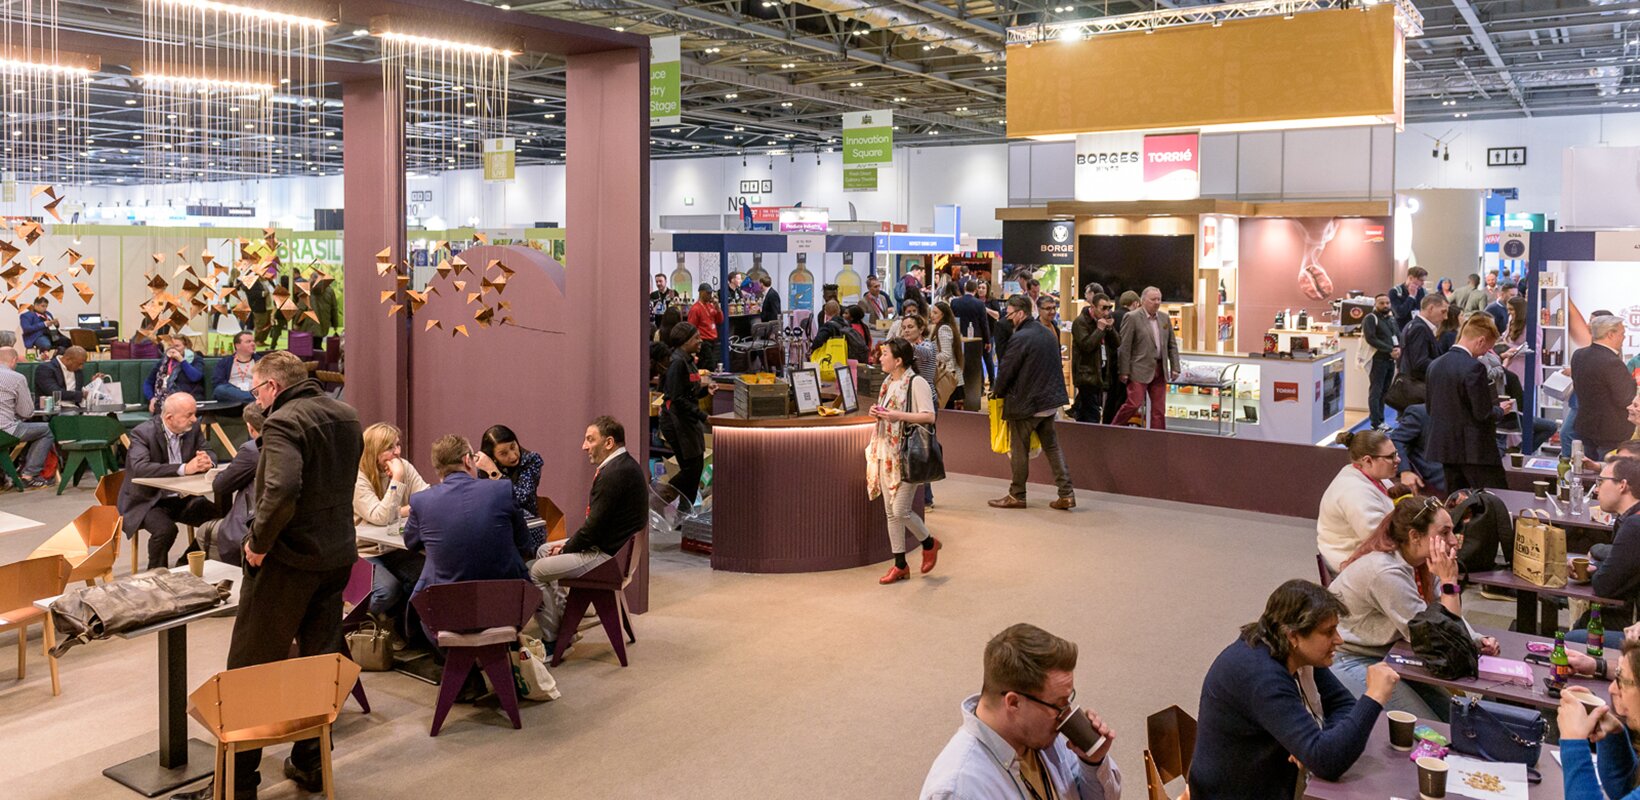 Get a flavour of the Hotel, Restaurant and Catering show